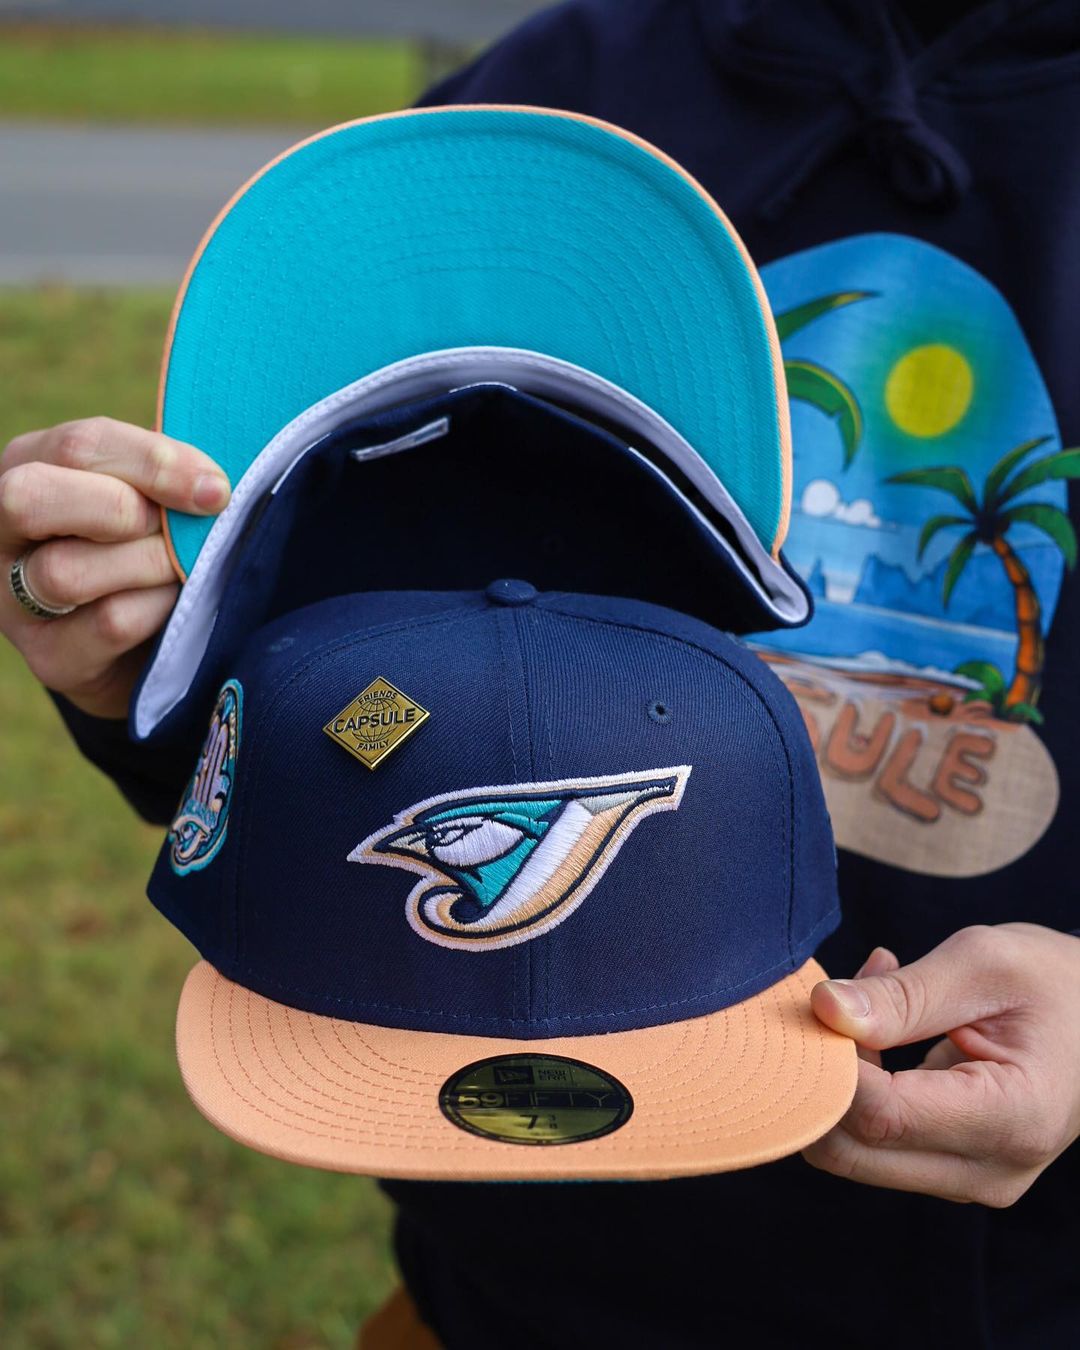 Oceanside Fitted Hats